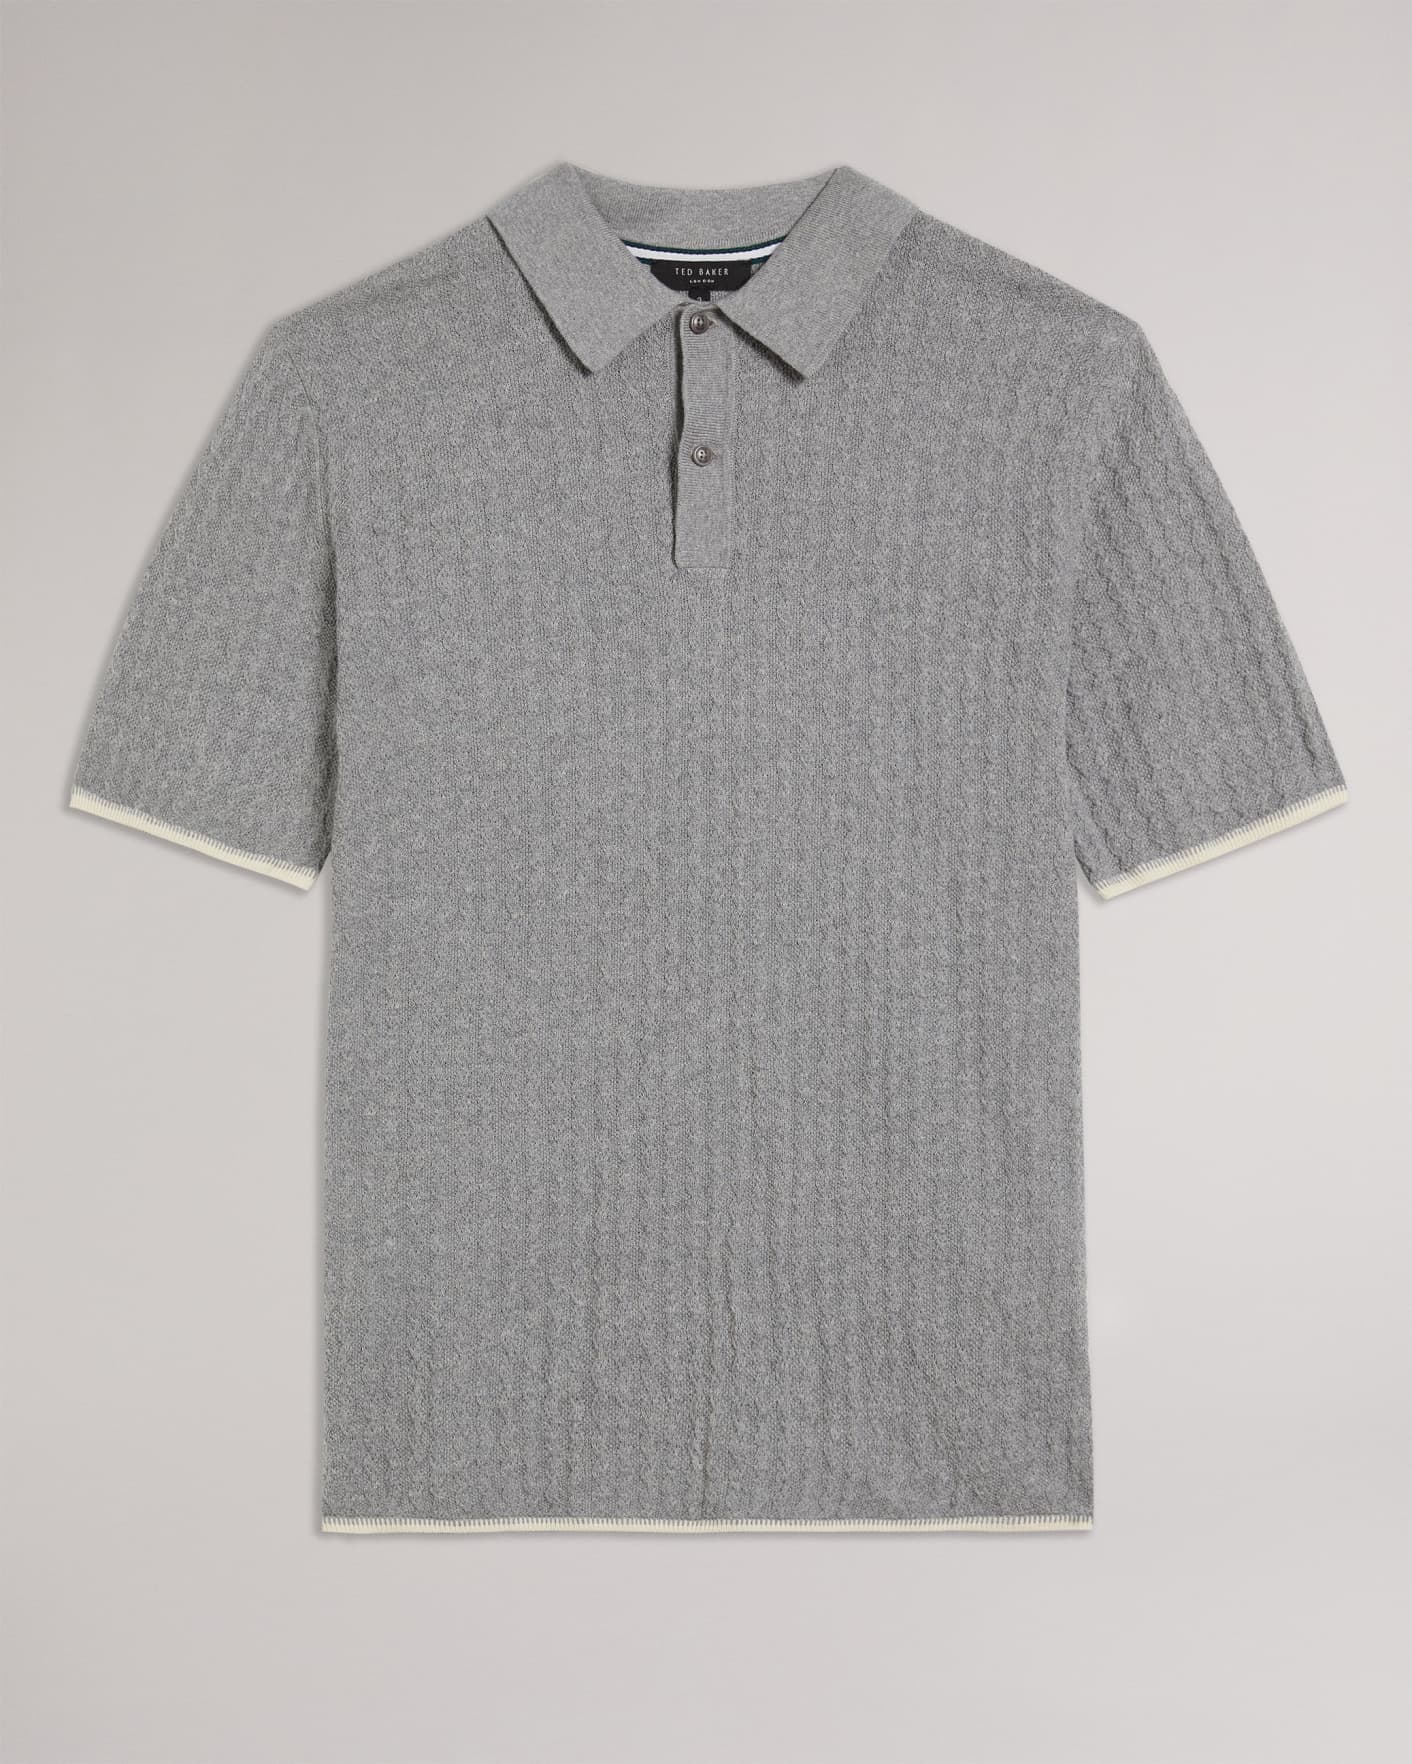 Gray Marl Knitted Textured Stitch Polo Ted Baker